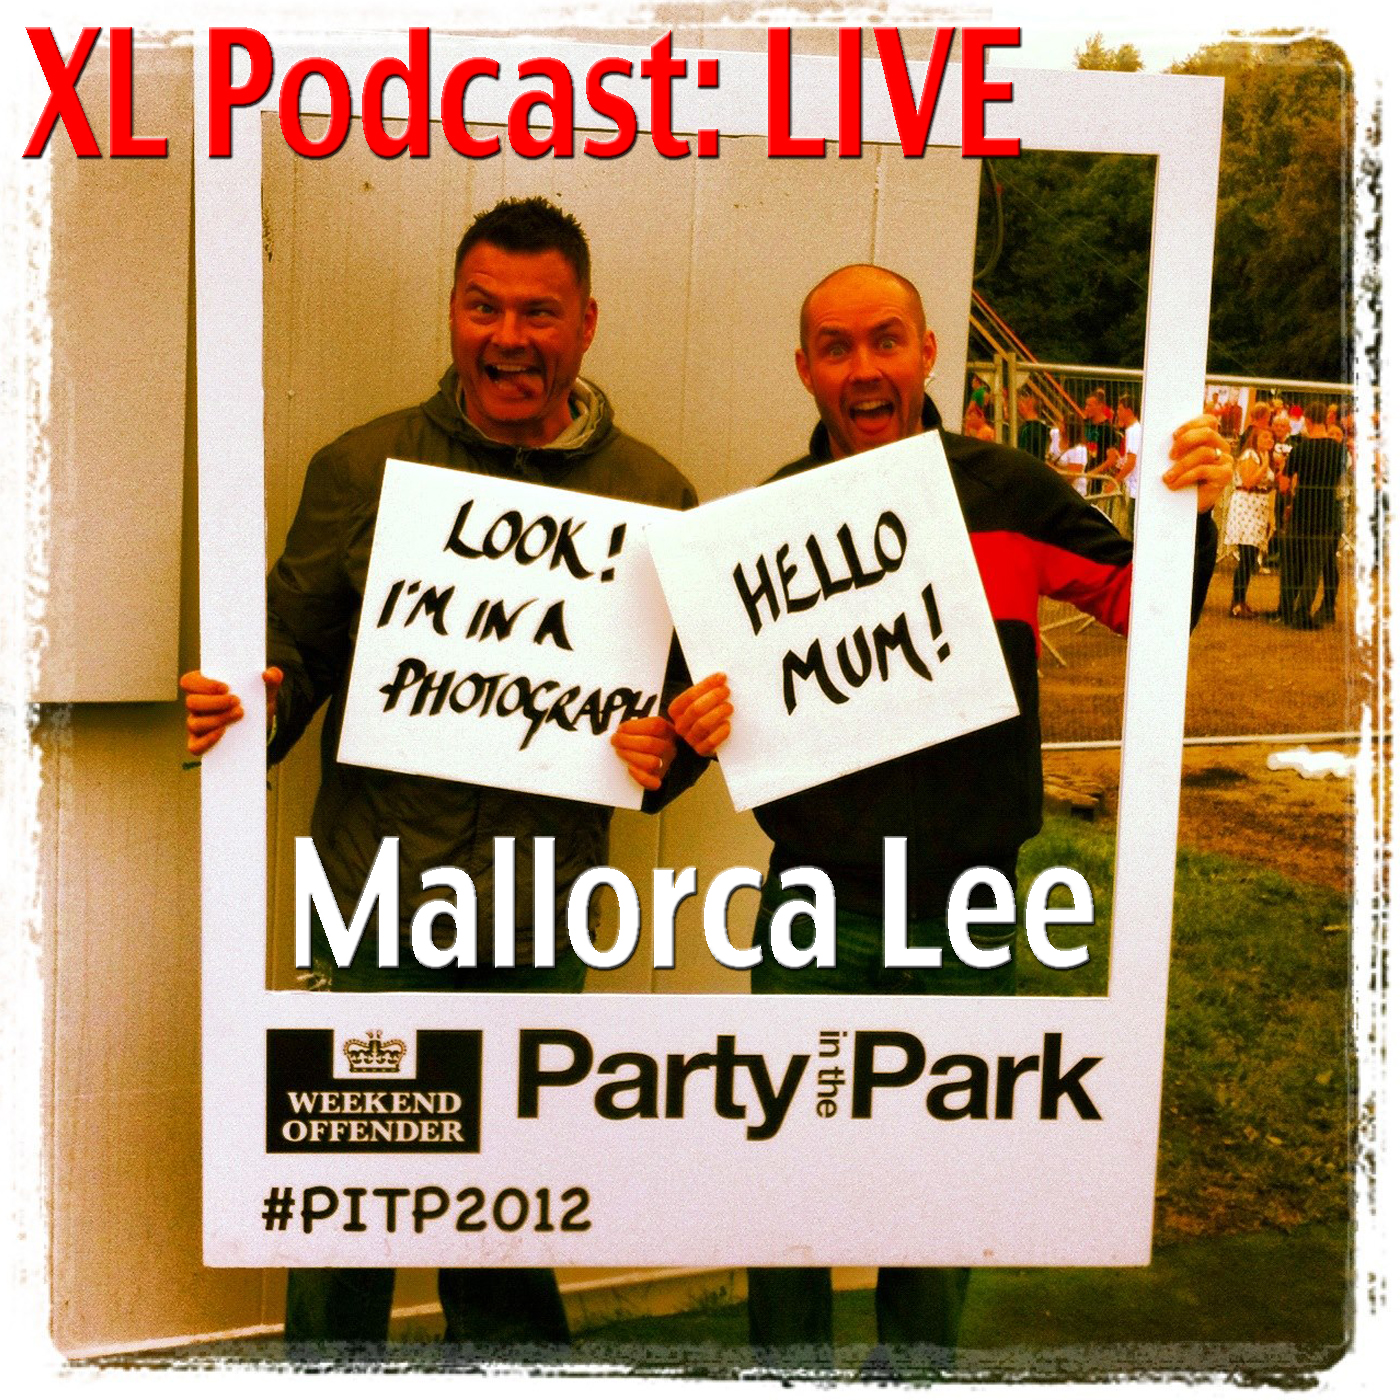 Mallorca Lee’s XL Podcast ep.22 LIVE Party In The Park Festival